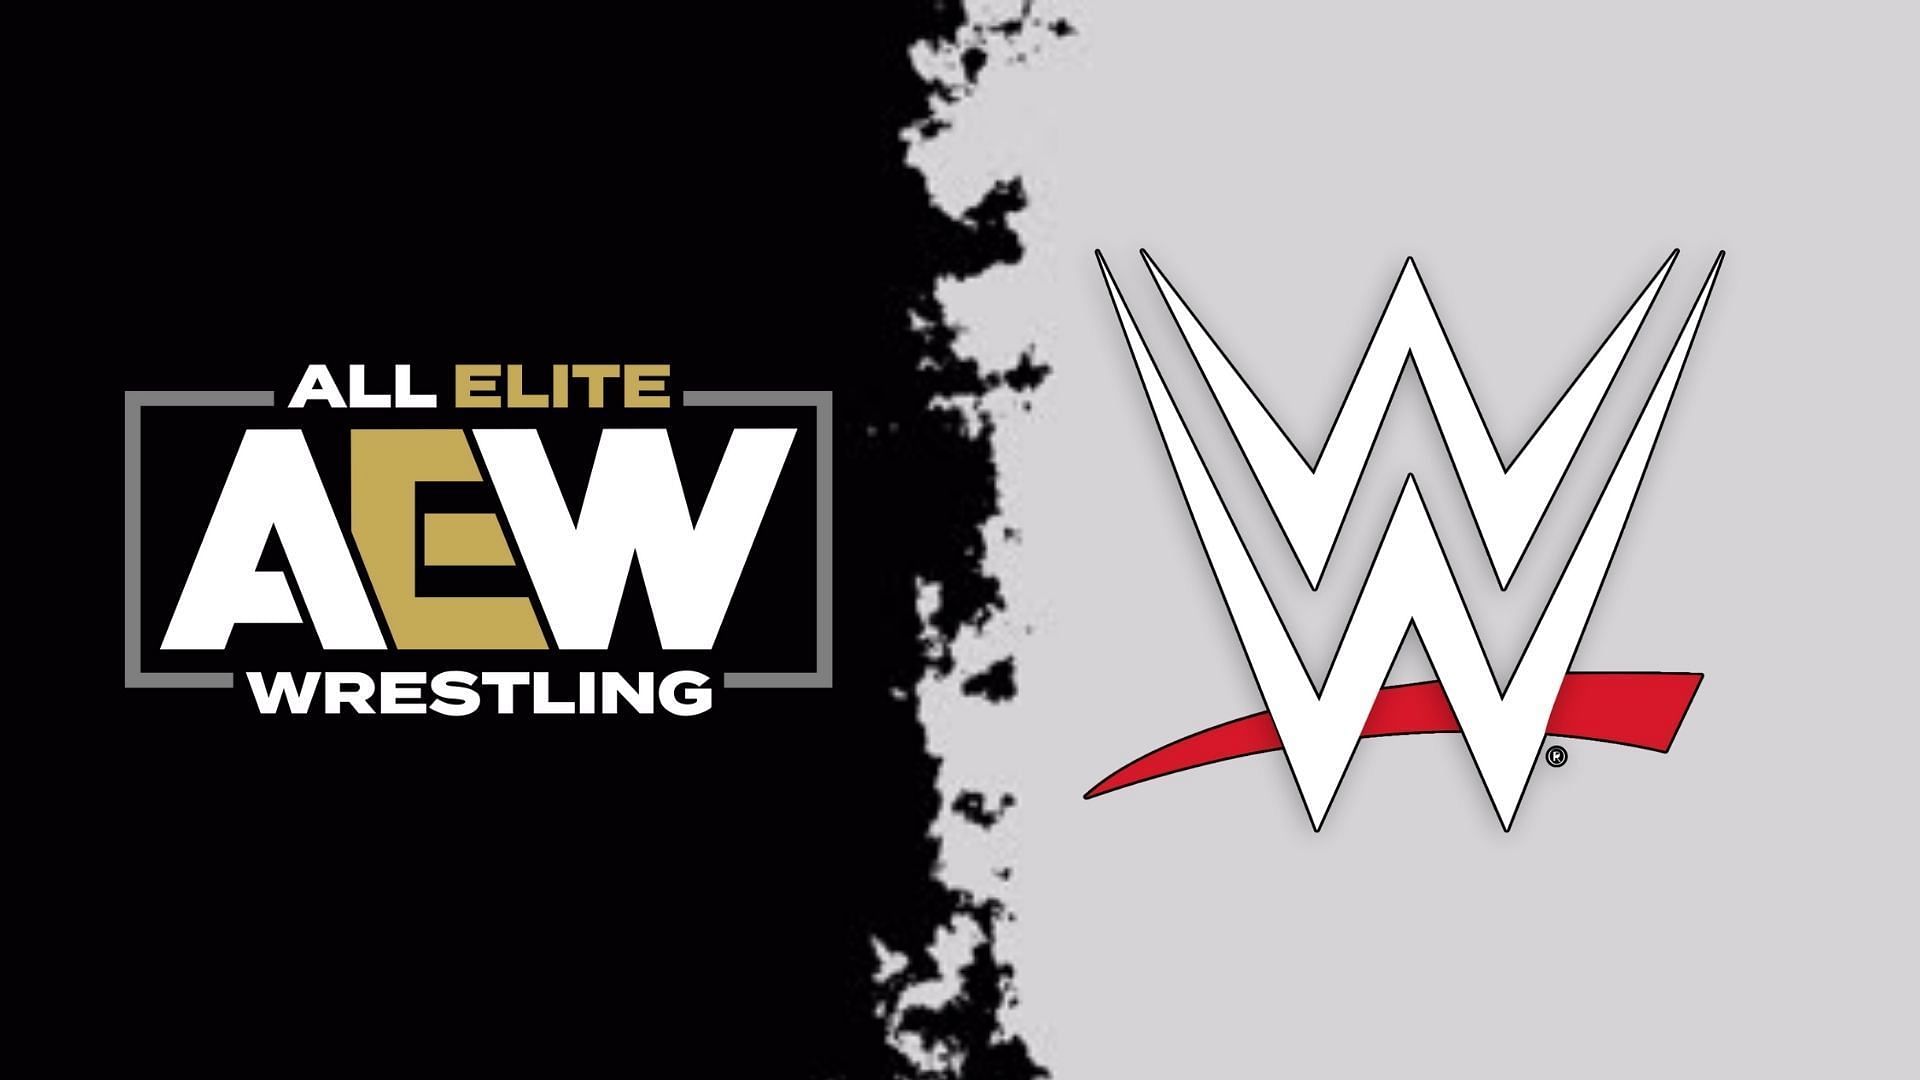 Can AEW ever take the number one spot from WWE?